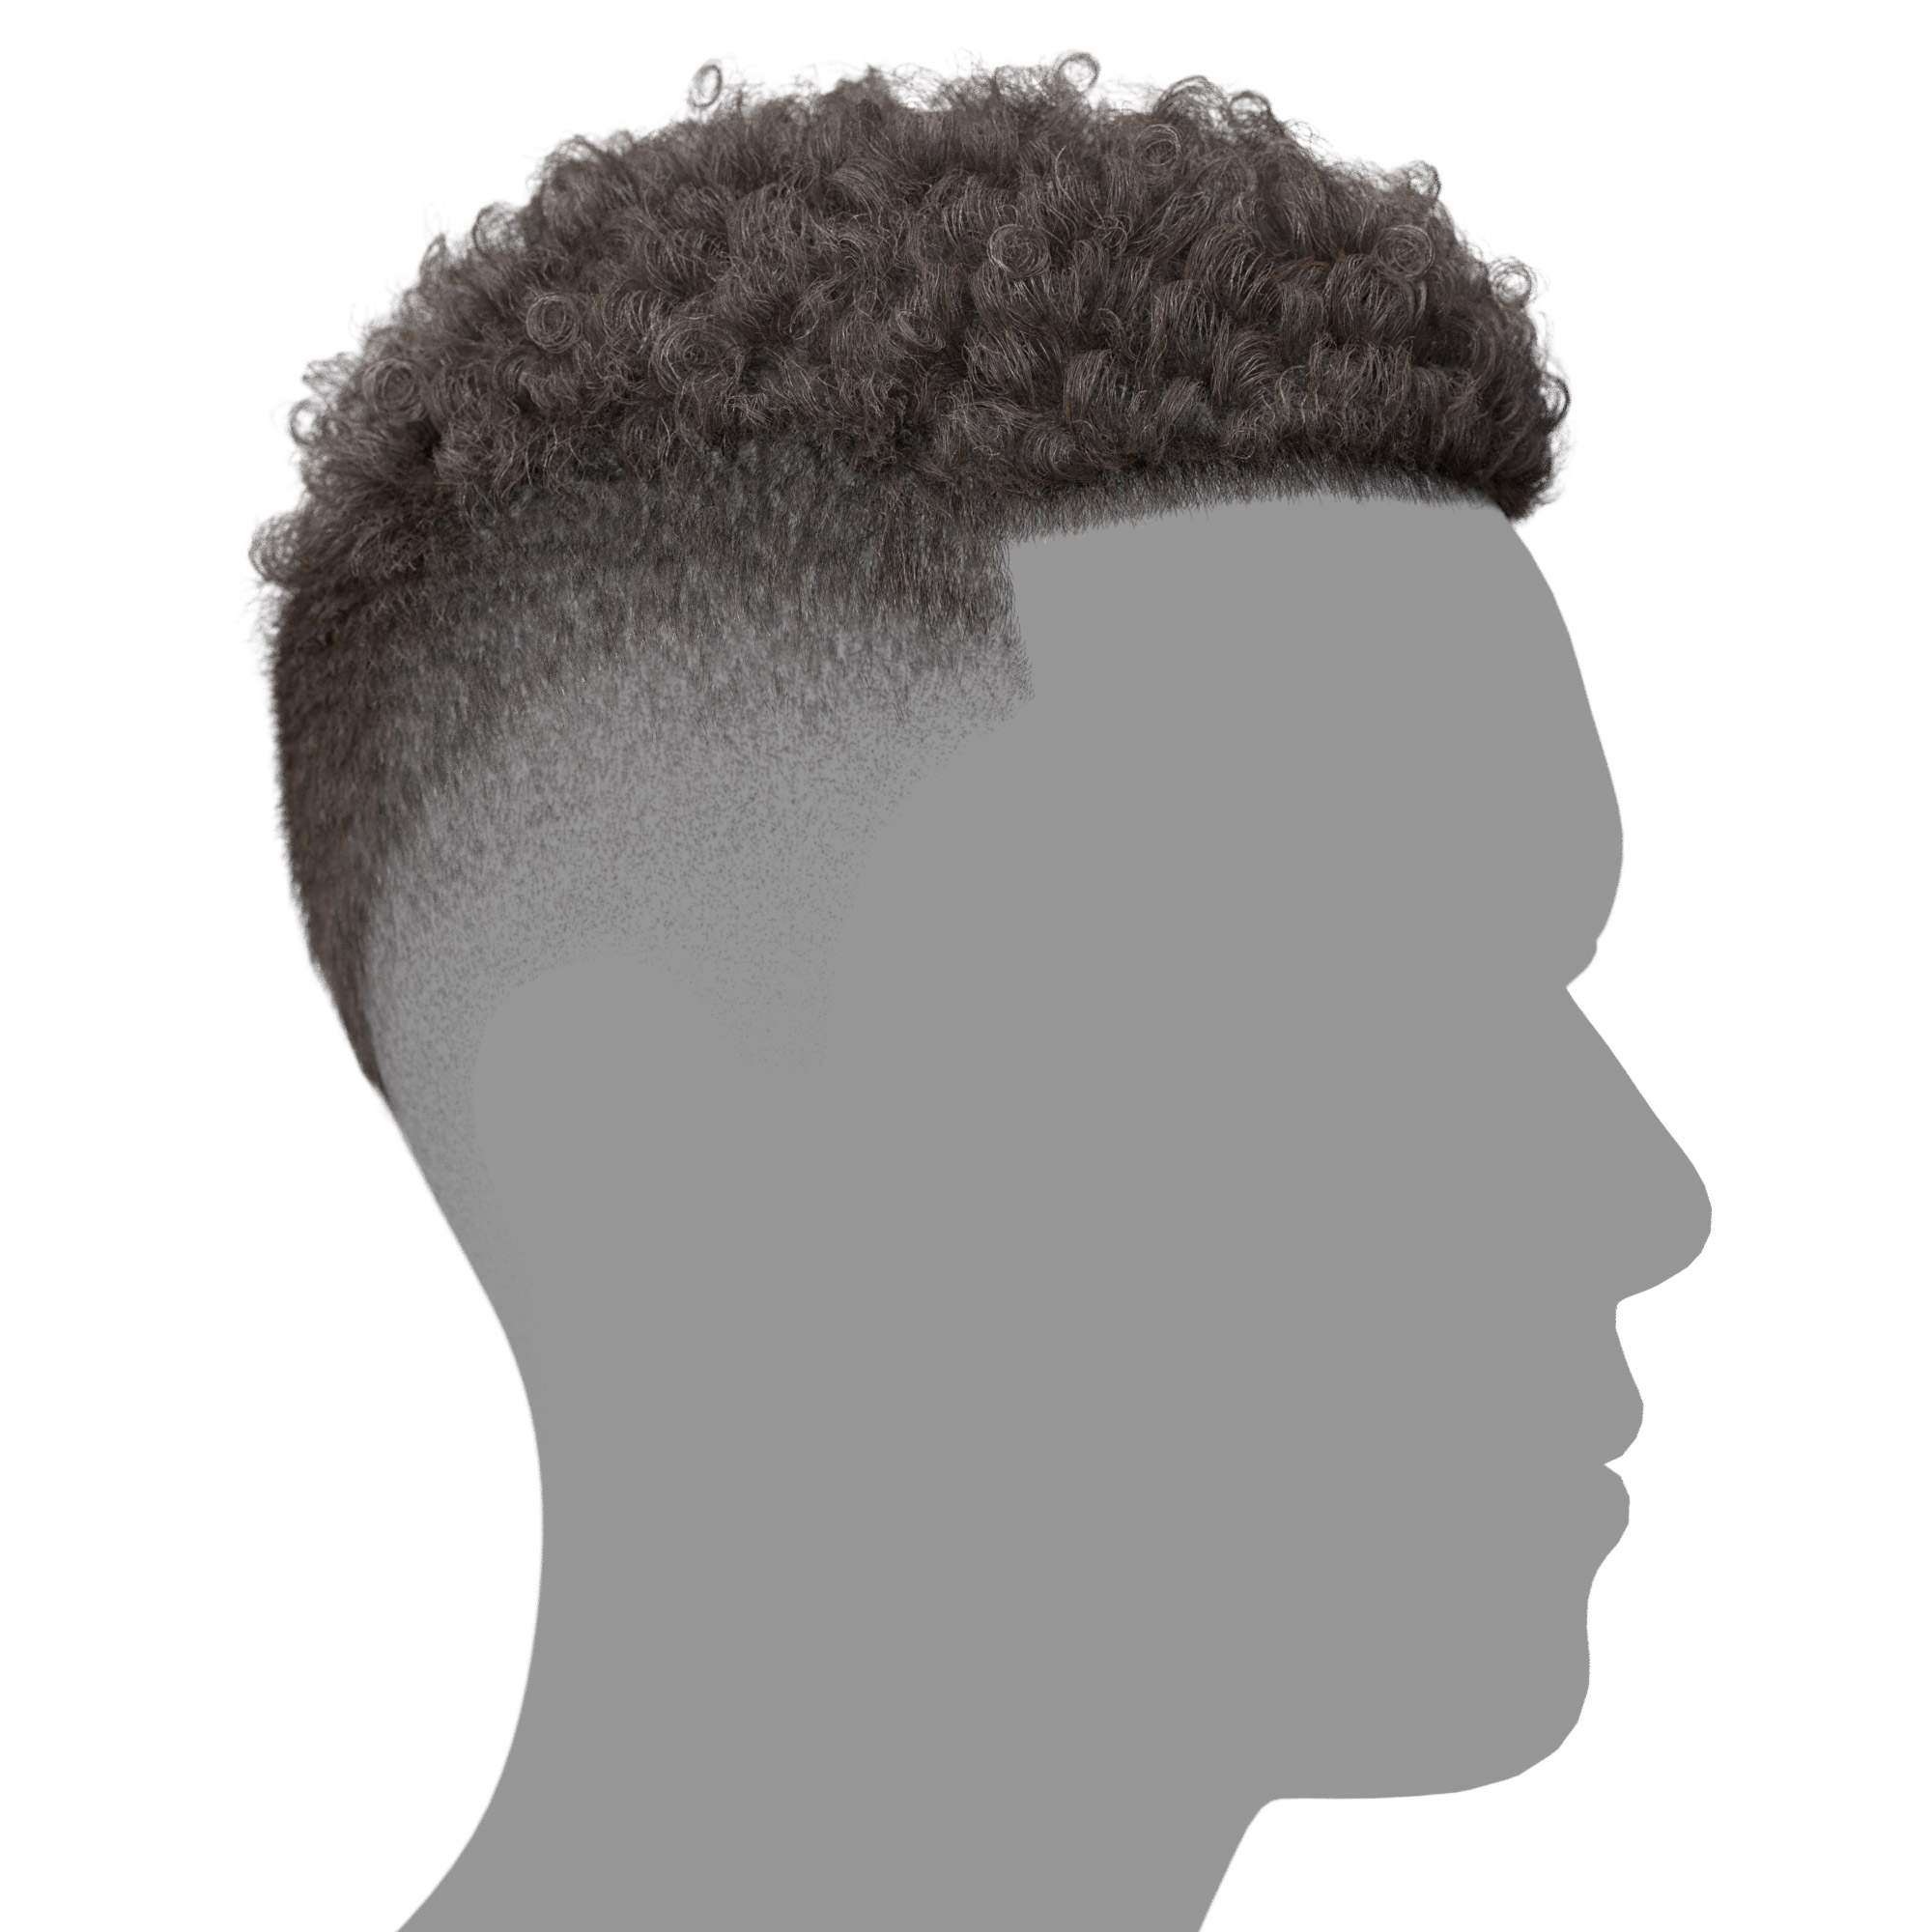 Realtime Hair - short afro male hair